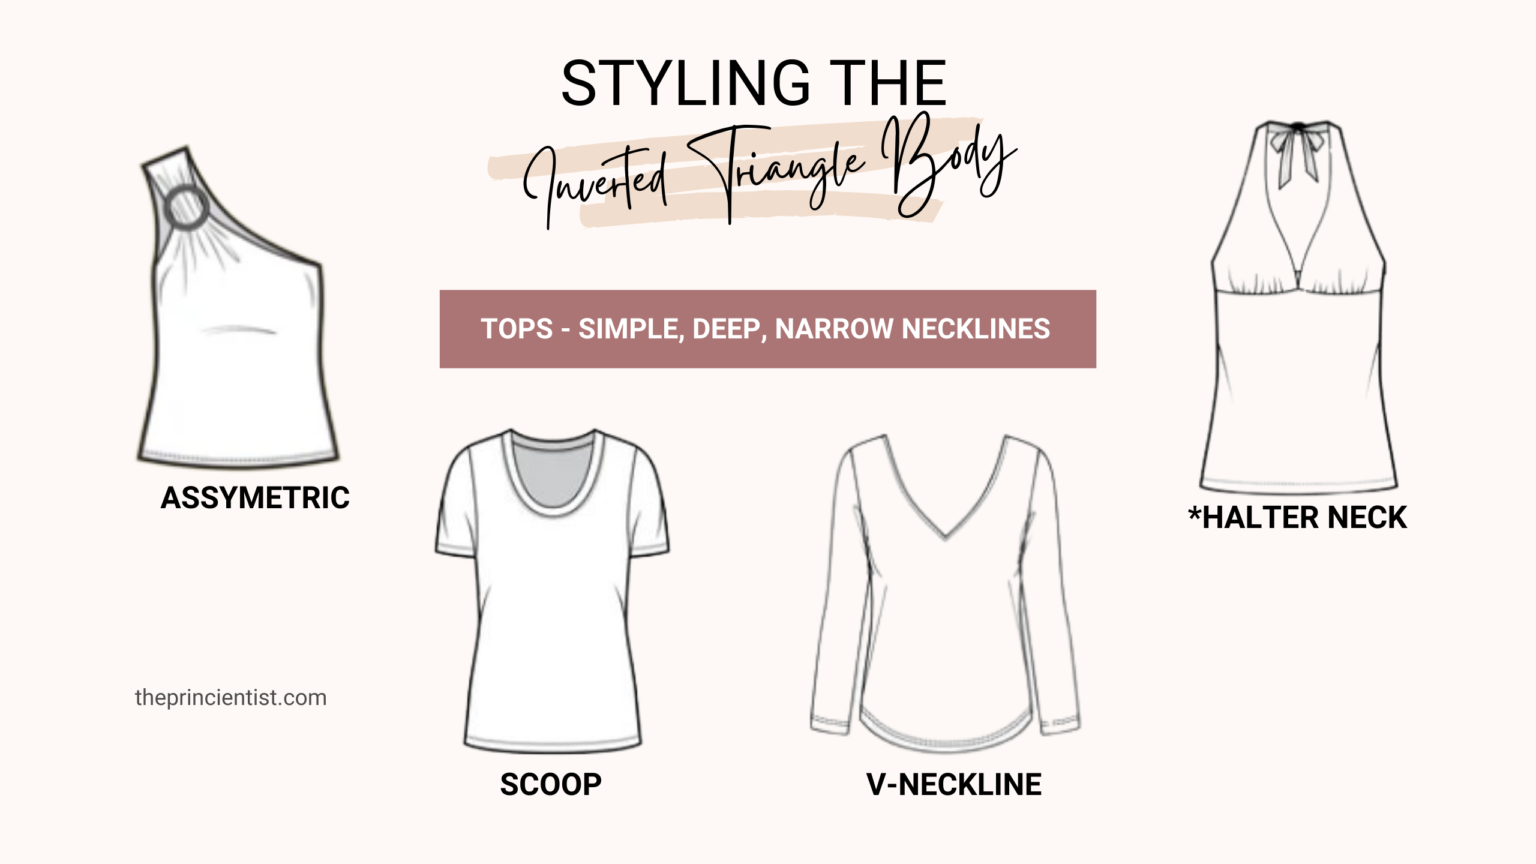 dress the inverted triangle body shape - simple, deep, narrow necklines